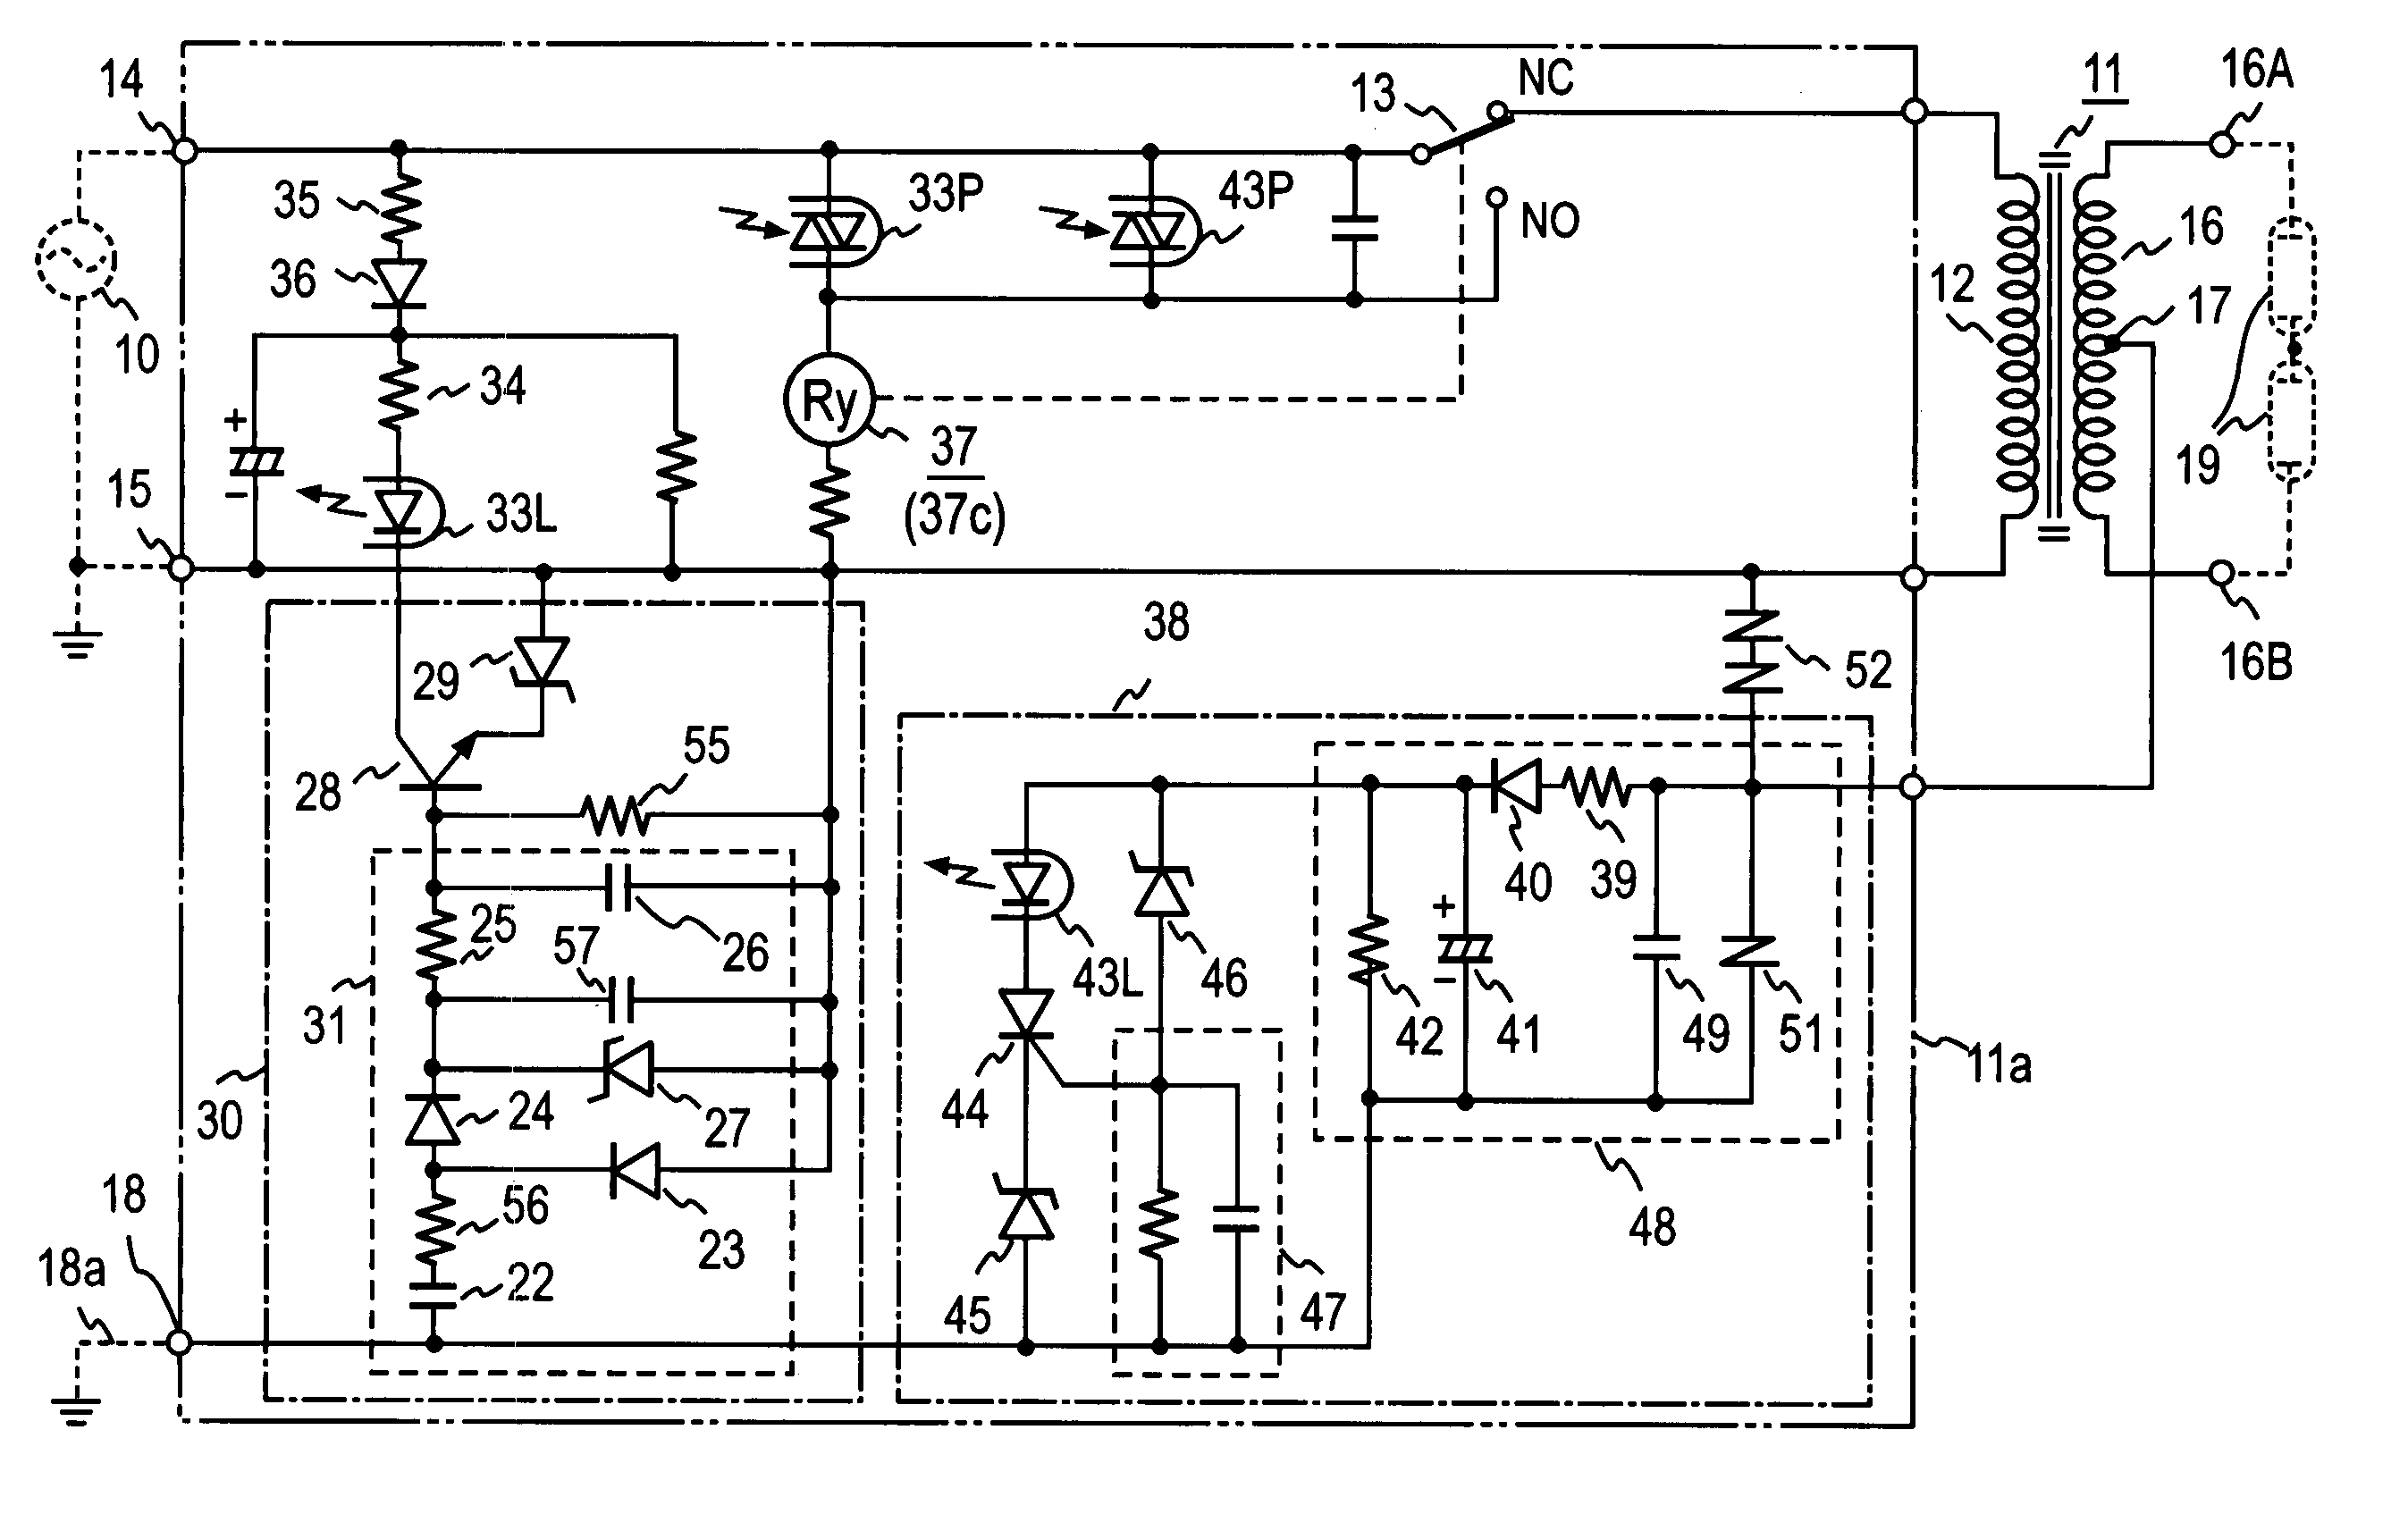 Discharge tube lighting transformer with protective circuit against non-grounding of ground terminal